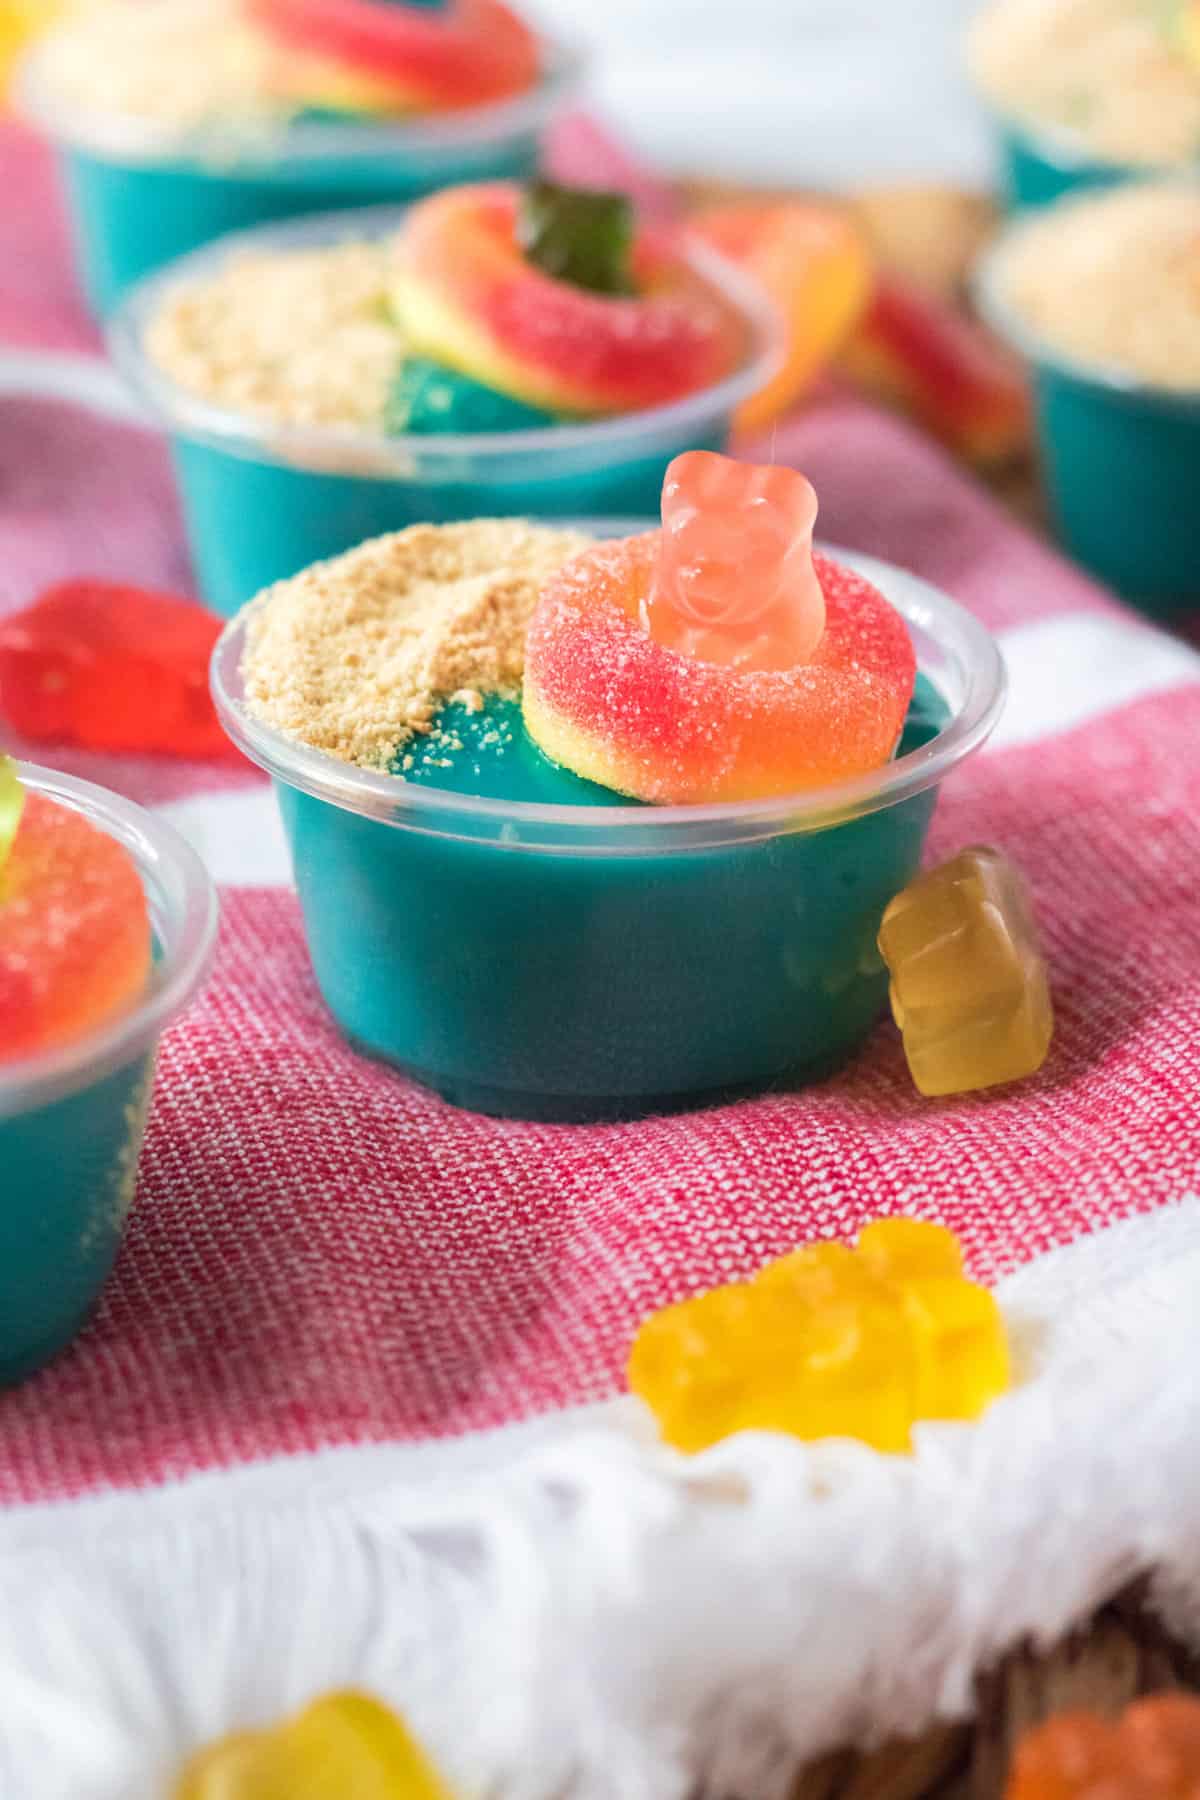 Extra gummy bears are scattered around a pudding shot on a tea towel.